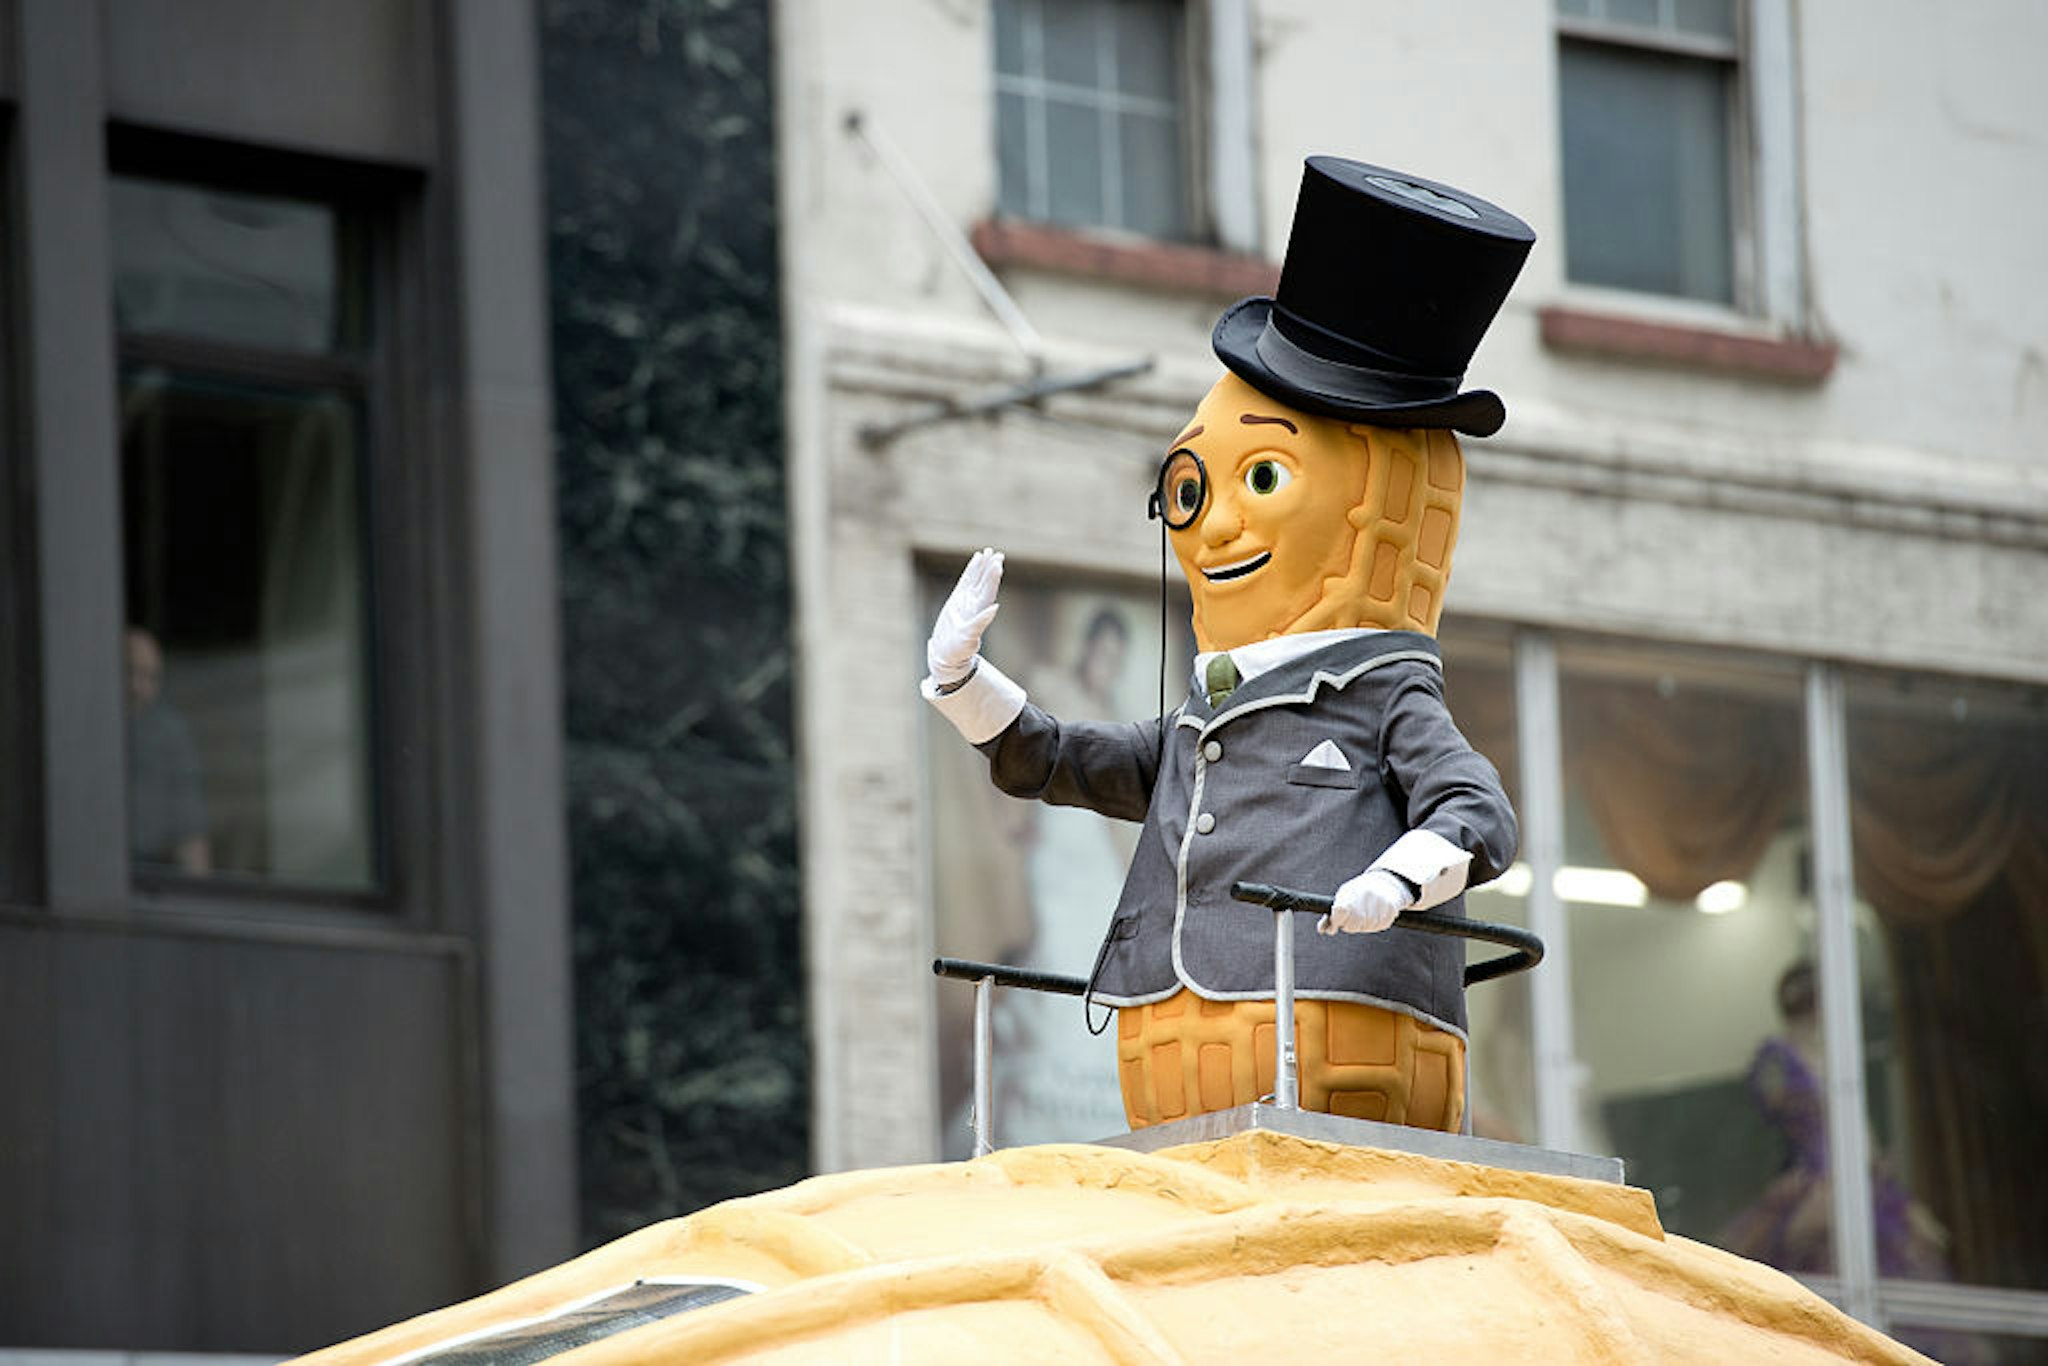 Mr. Peanut attends the 88th Annual Macys Thanksgiving Day Parade at on November 27, 2014 in New York, New York.